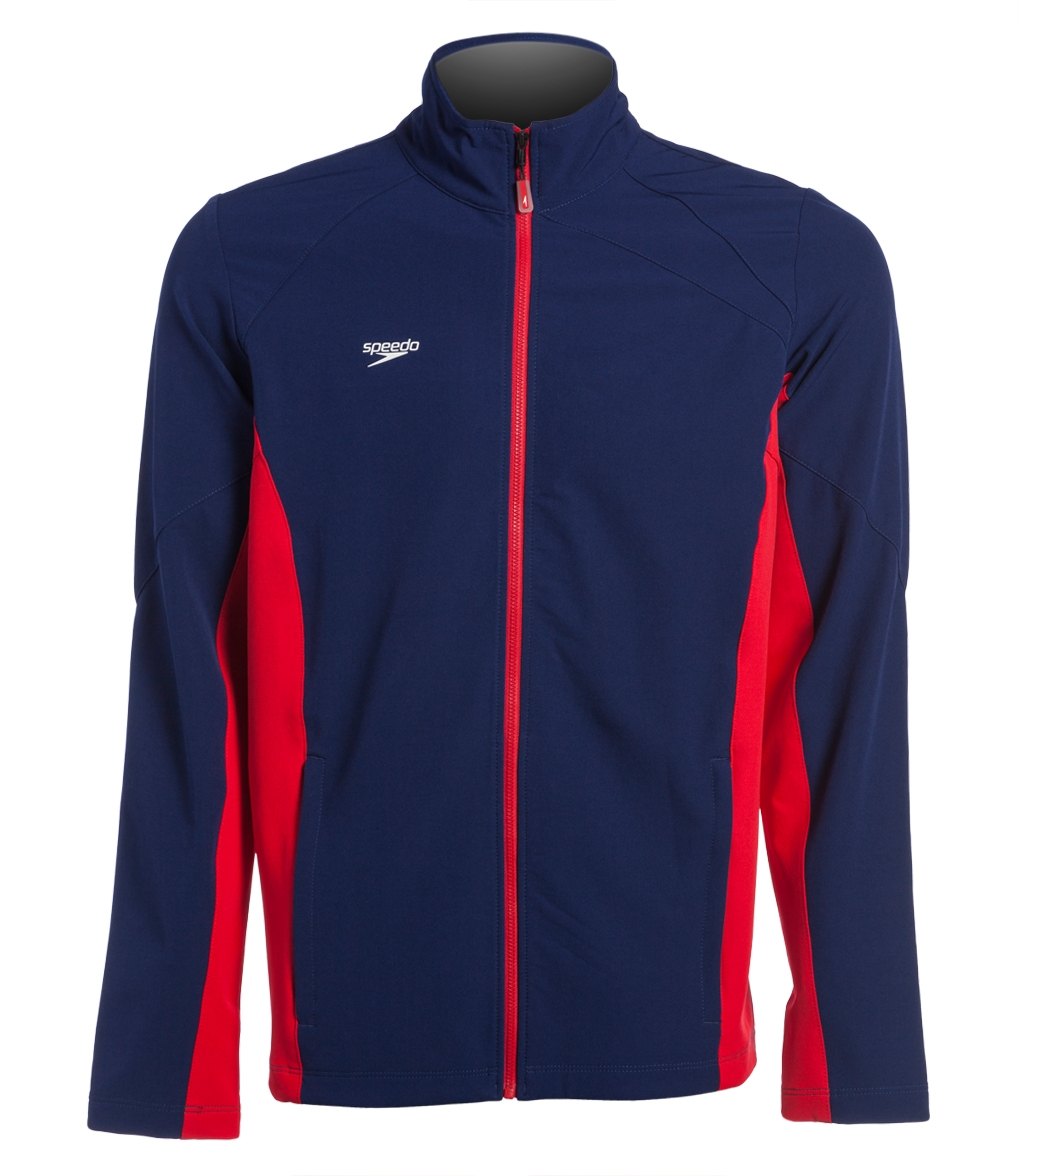 Speedo Men's Boom Force Warm Up Jacket at SwimOutlet.com - Free Shipping